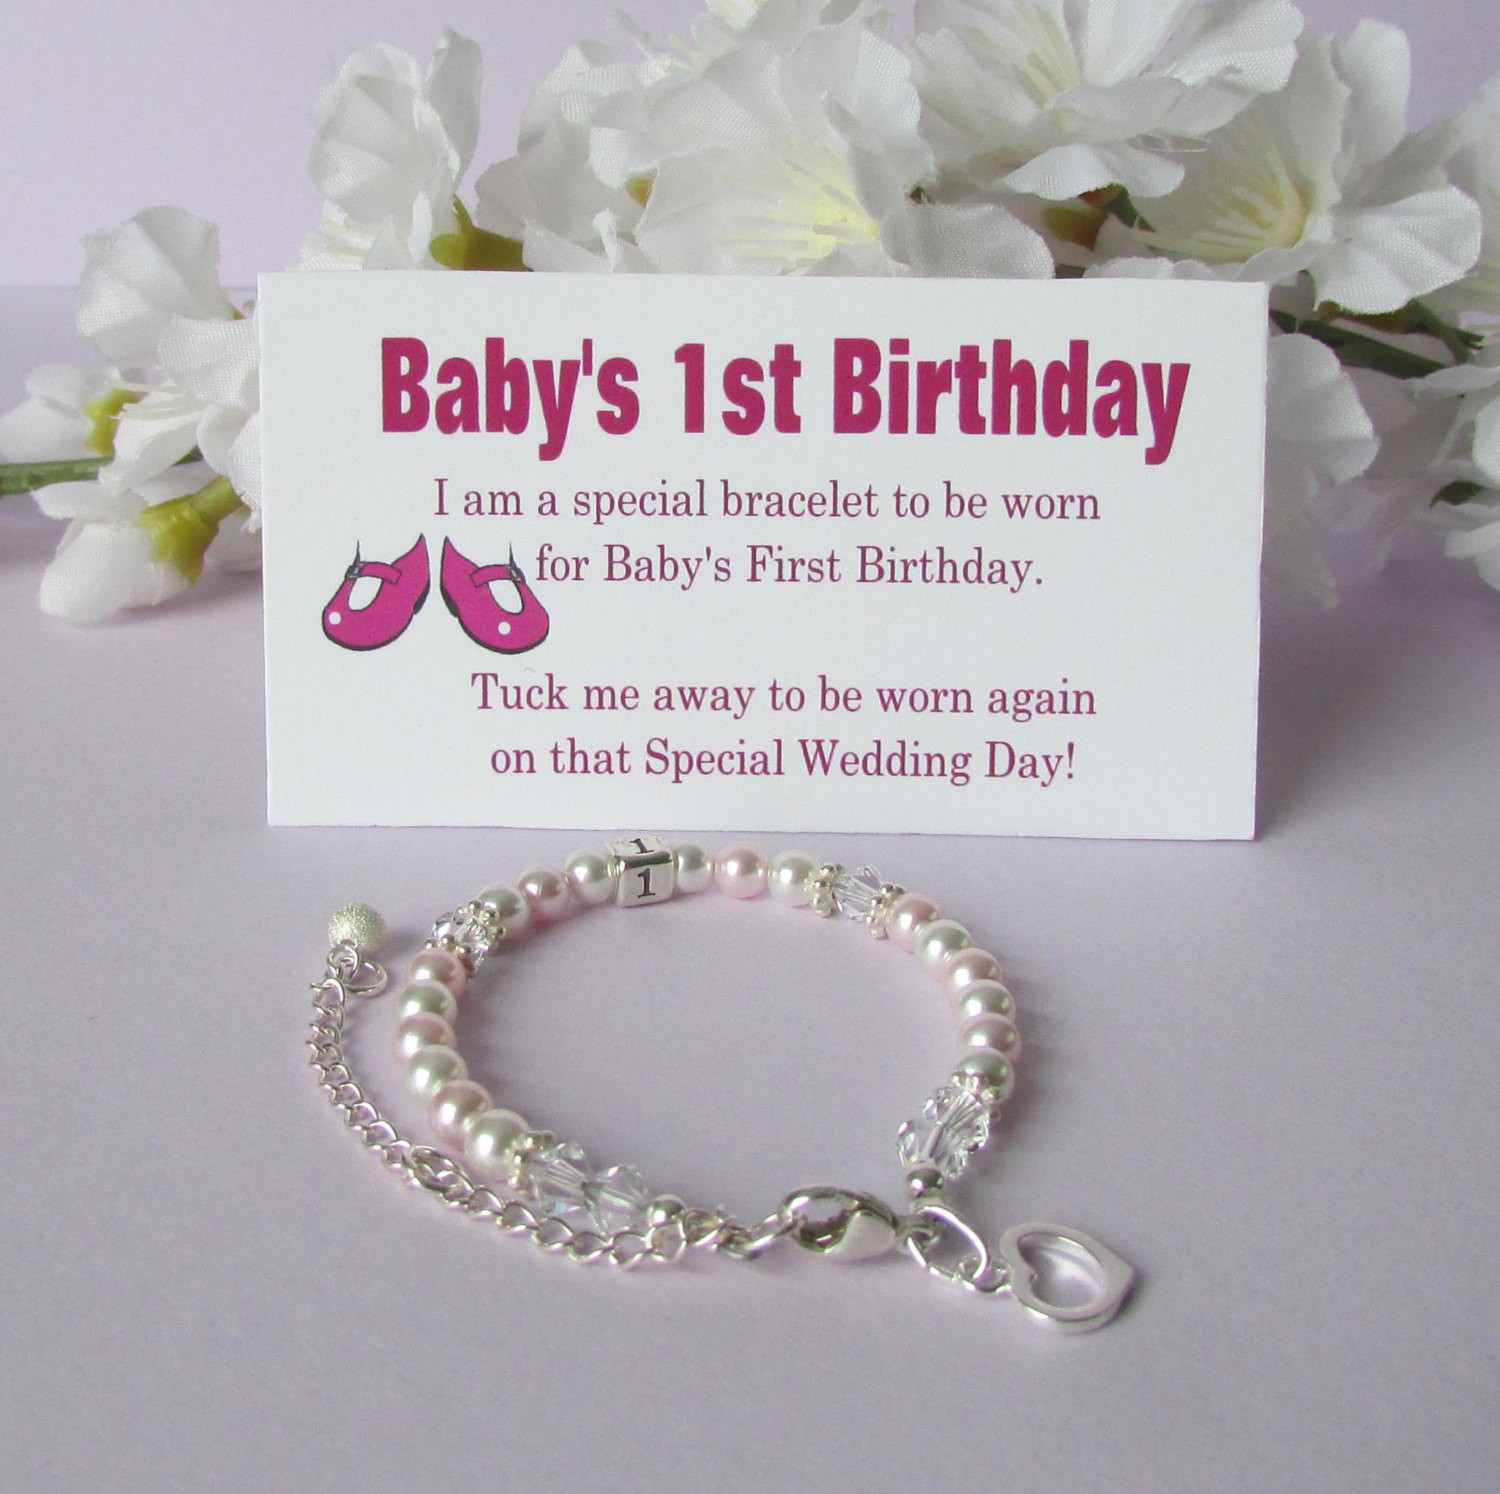 Gifts For 1st Birthday Girl
 Baby s 1st Birthday Gift Bracelet Baby to Bride Growing